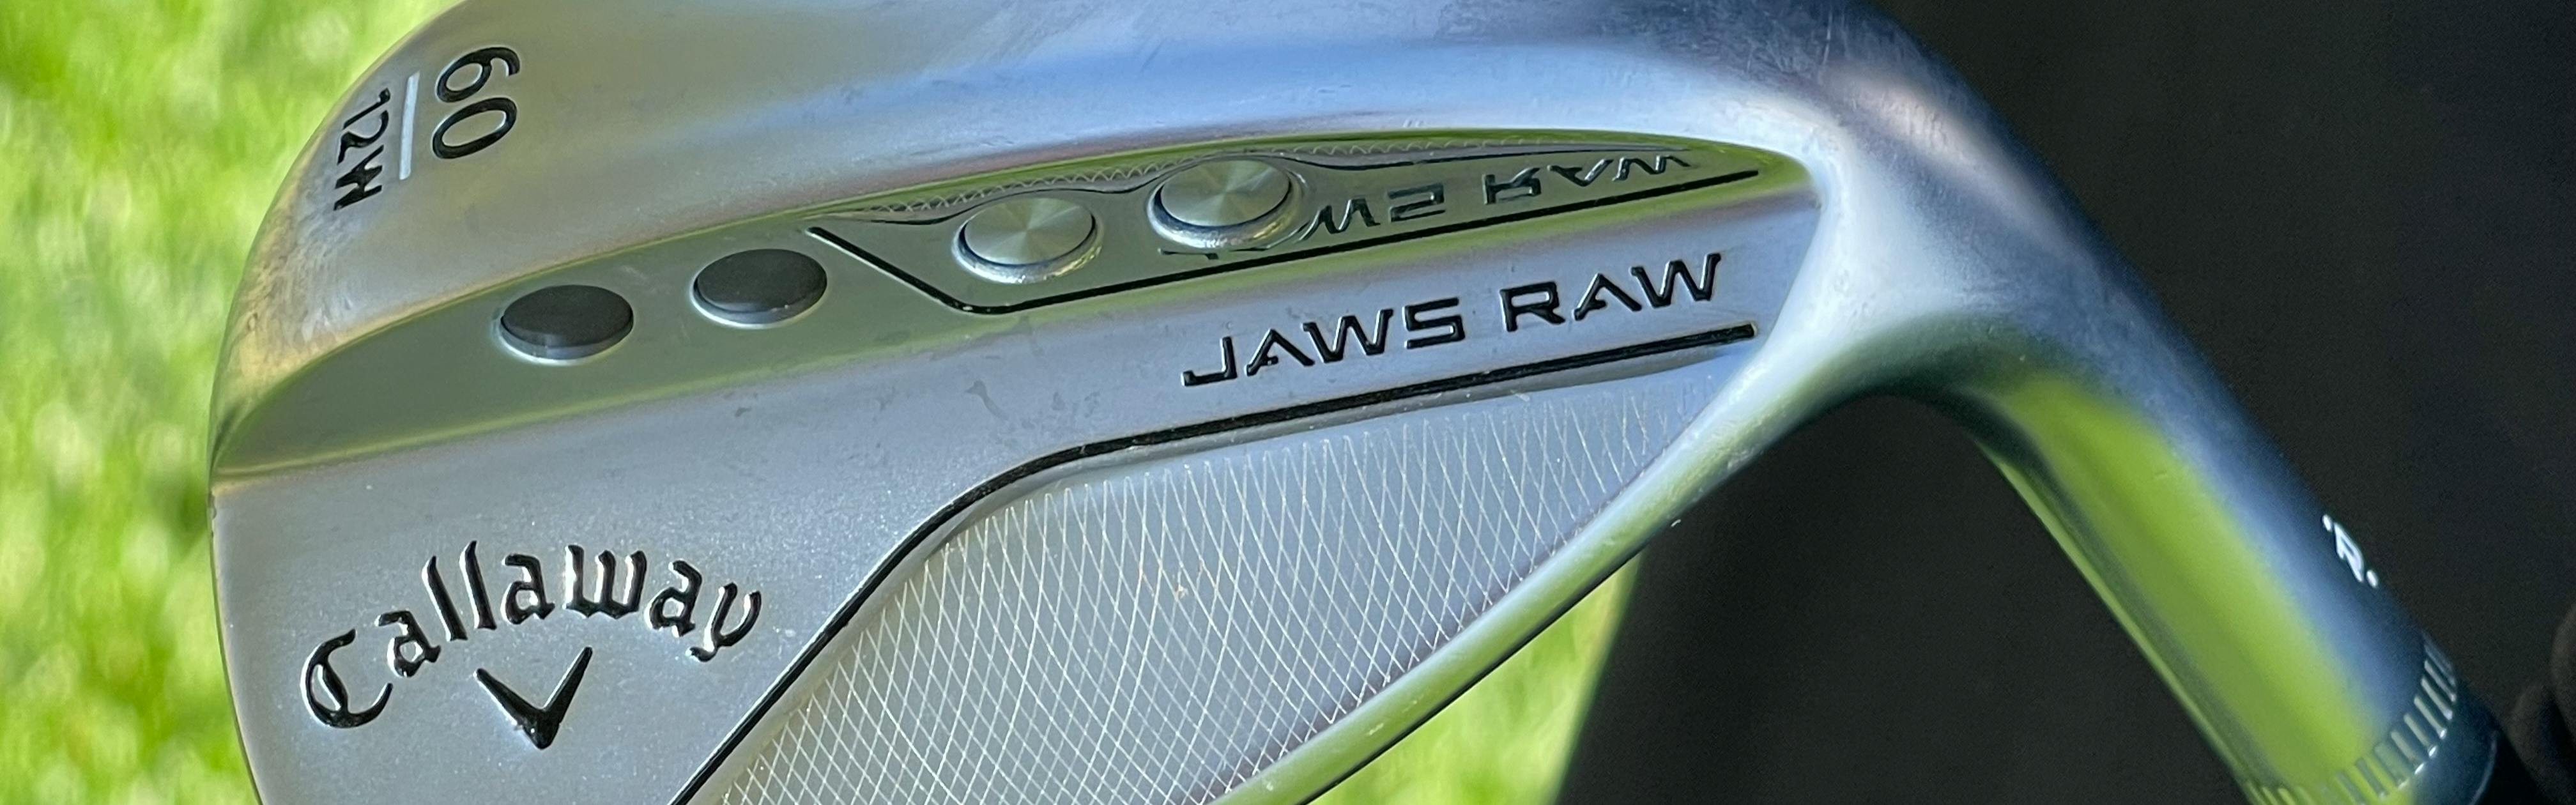 The author's image of the Callaway Jaws Raw Wedge.